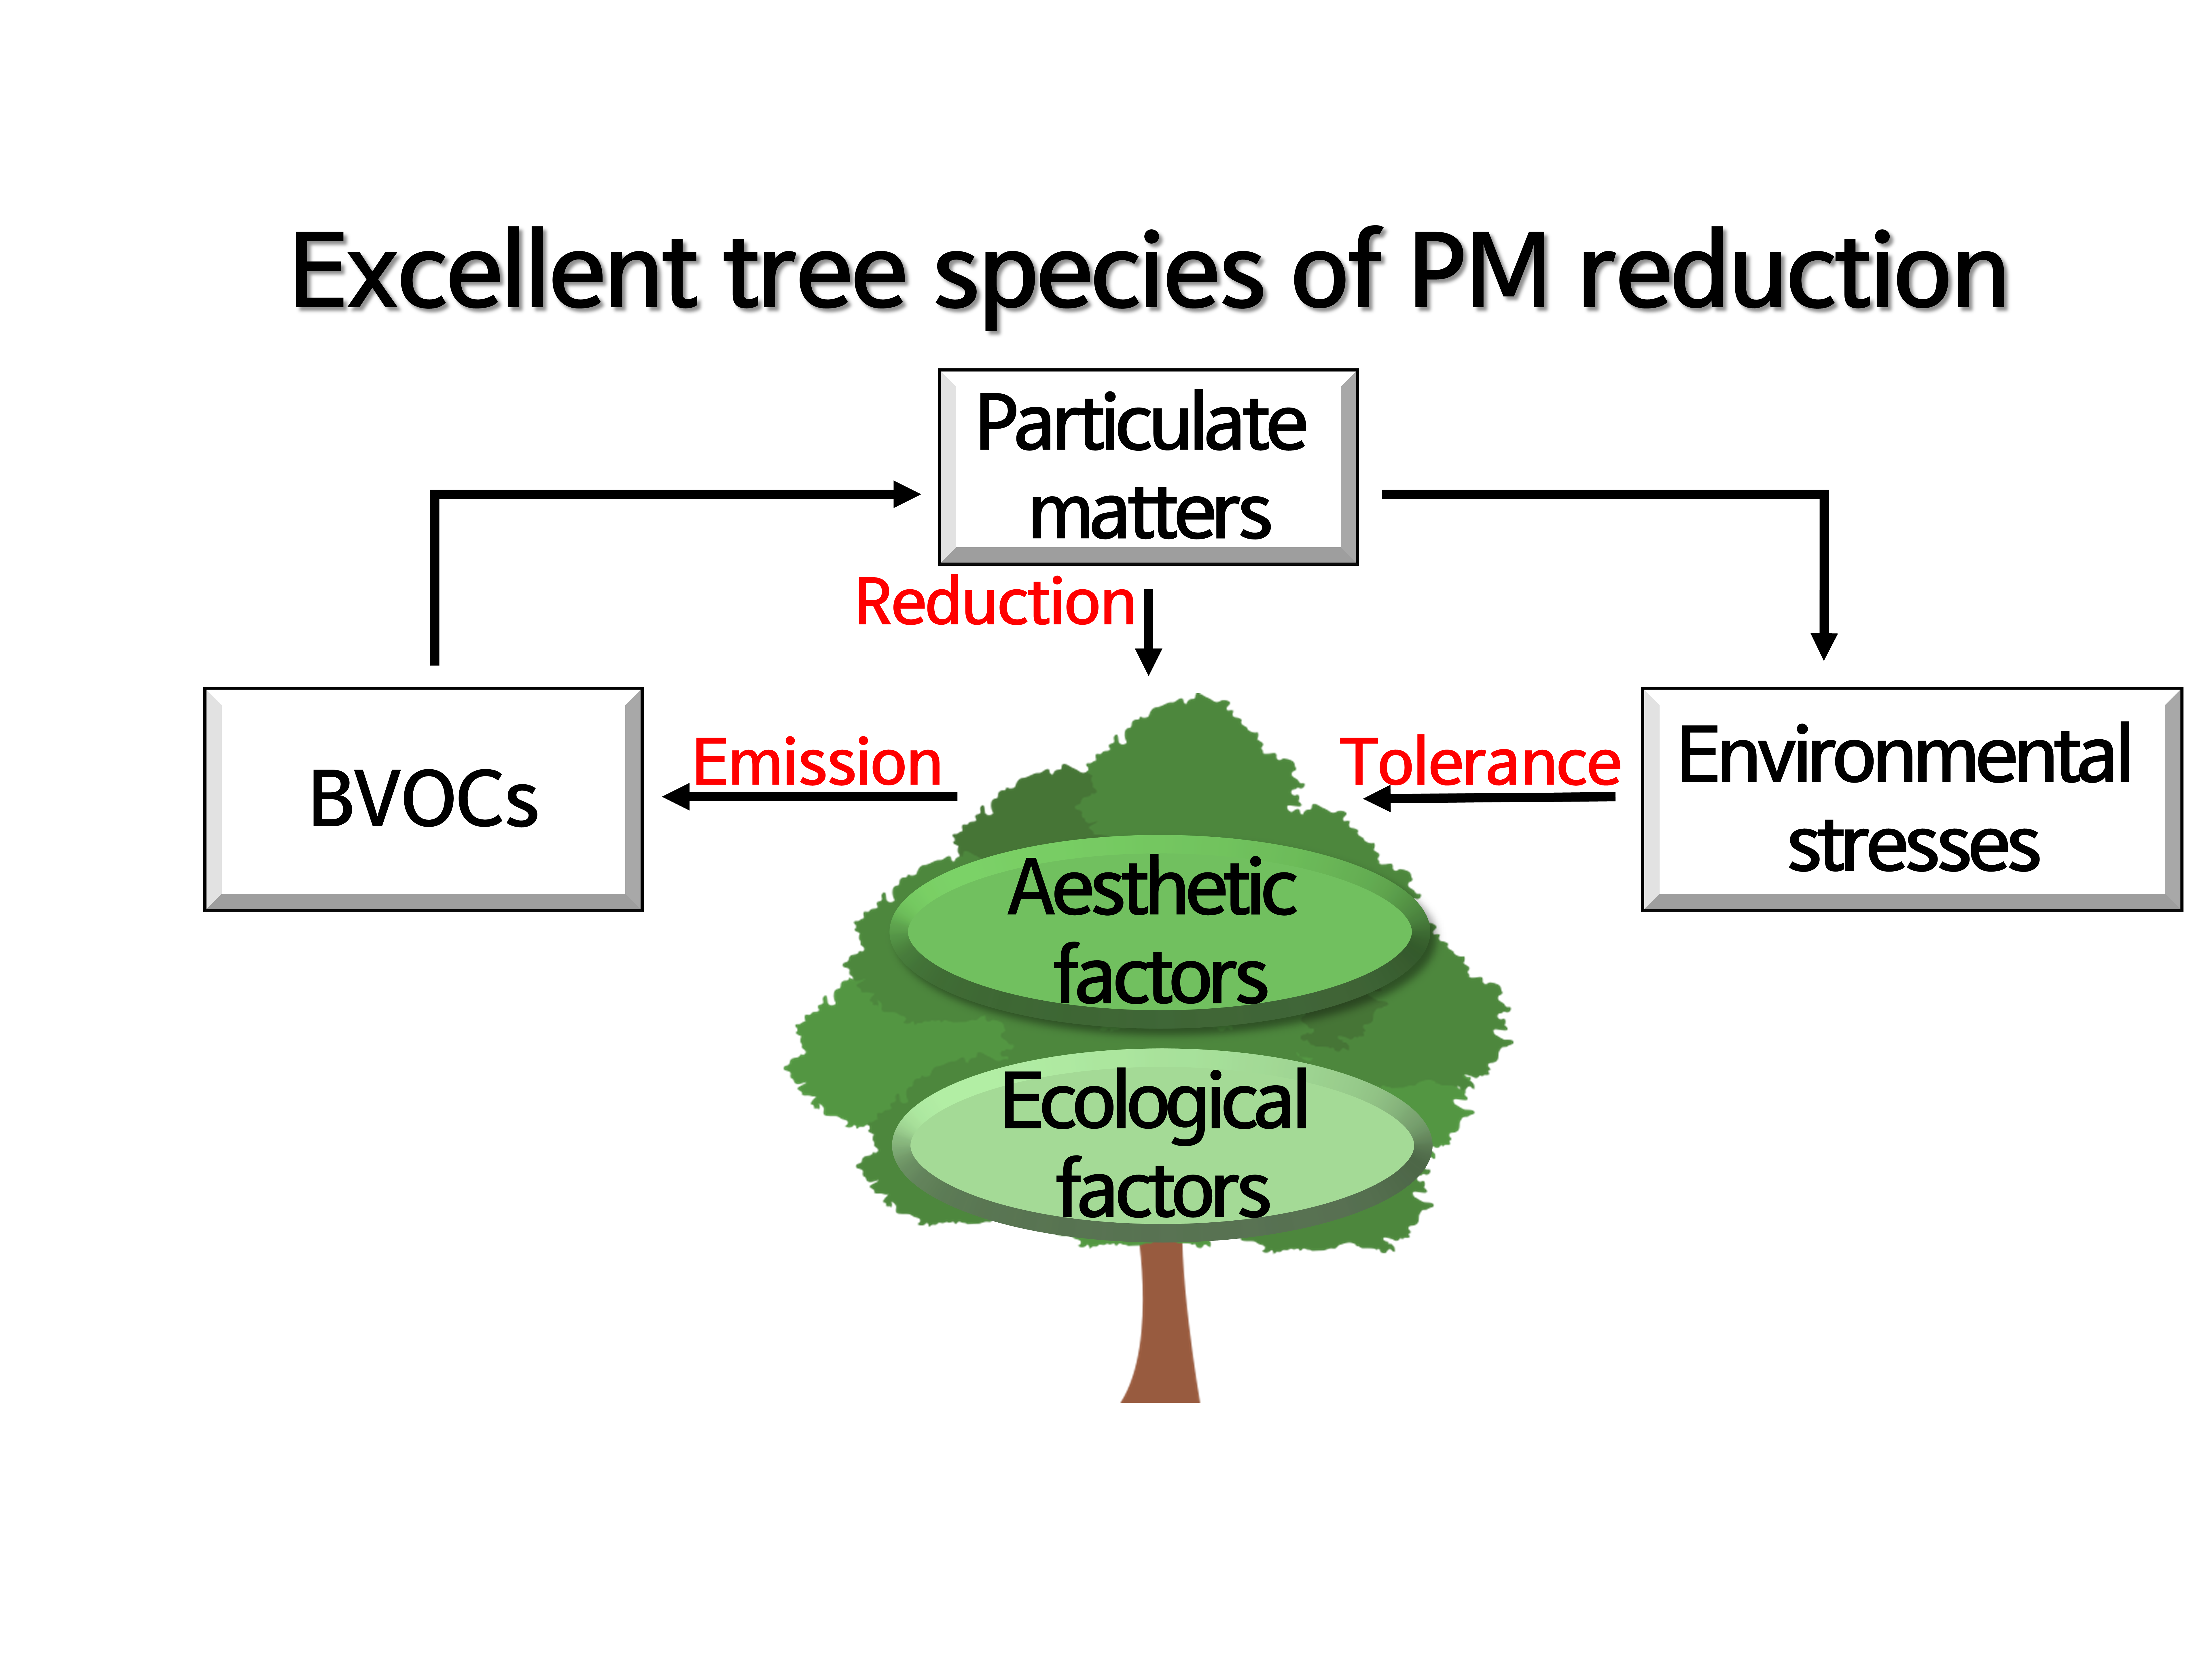 Selection for excellent tree species of PM reduction